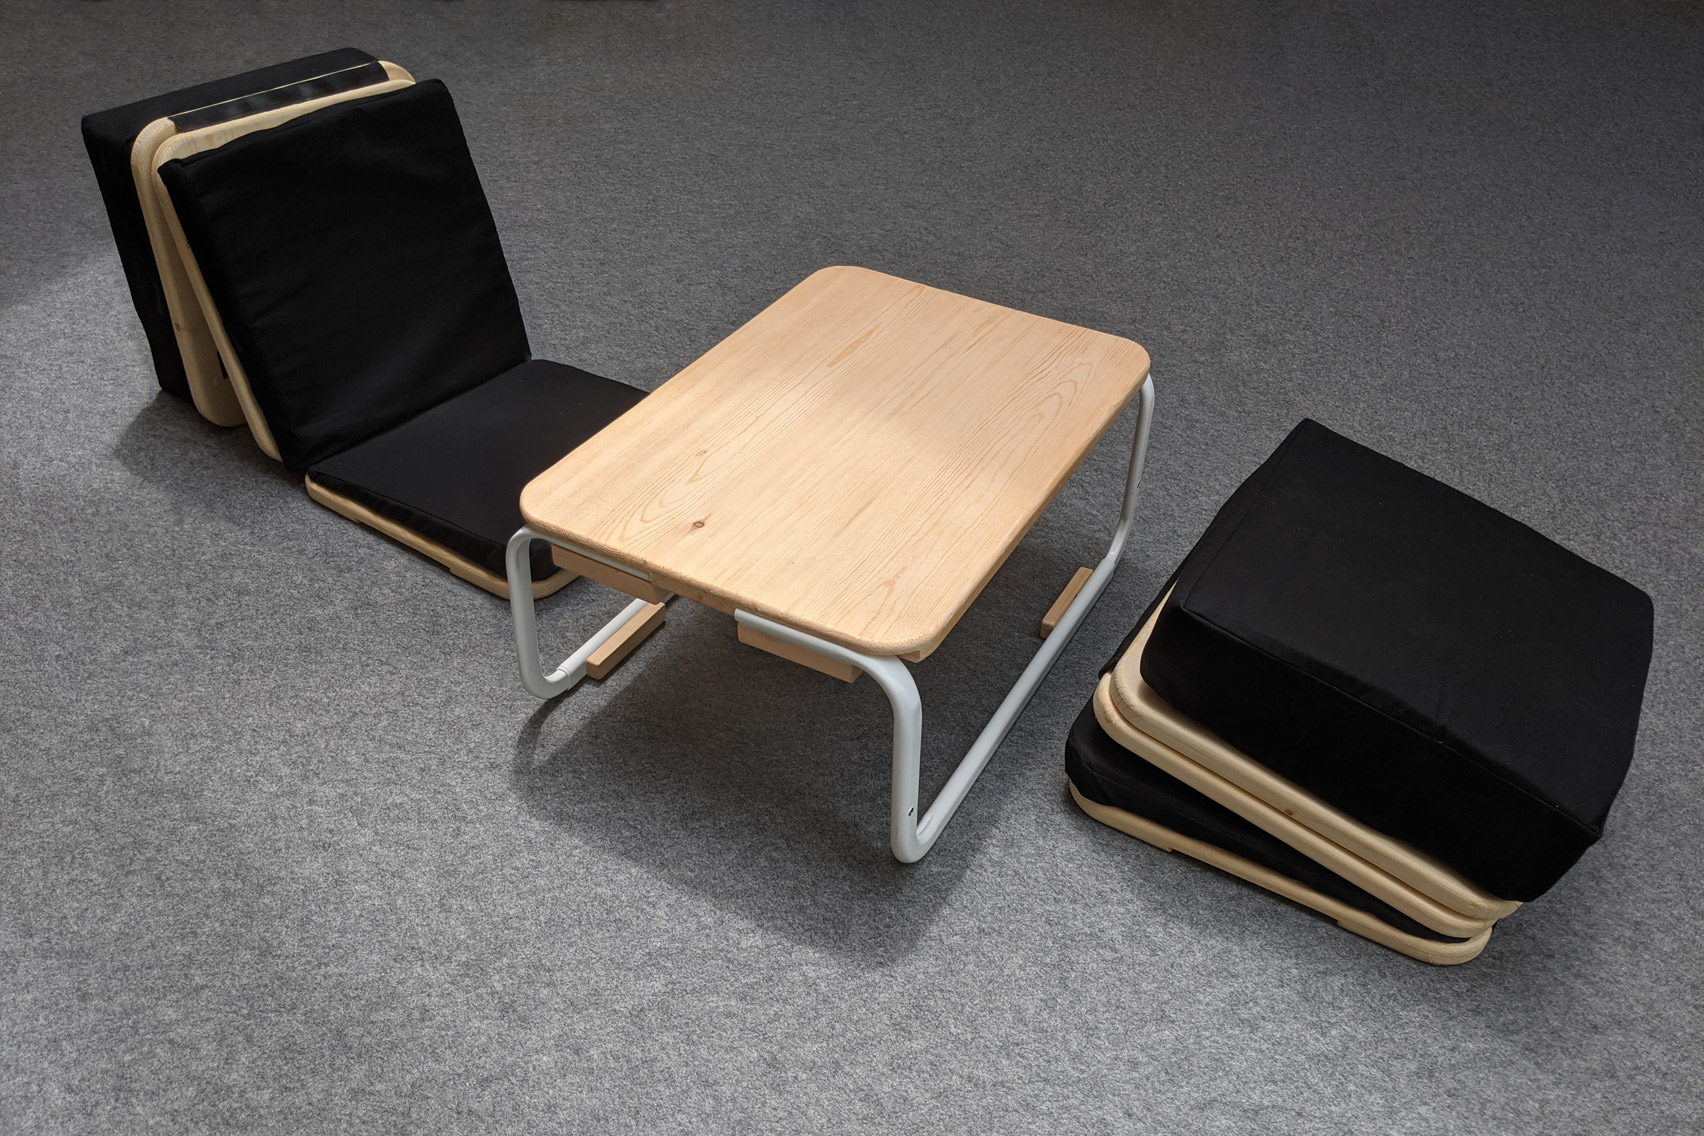 Comfor:t:able by Mathis Buchbinder for PolyU Design school show 